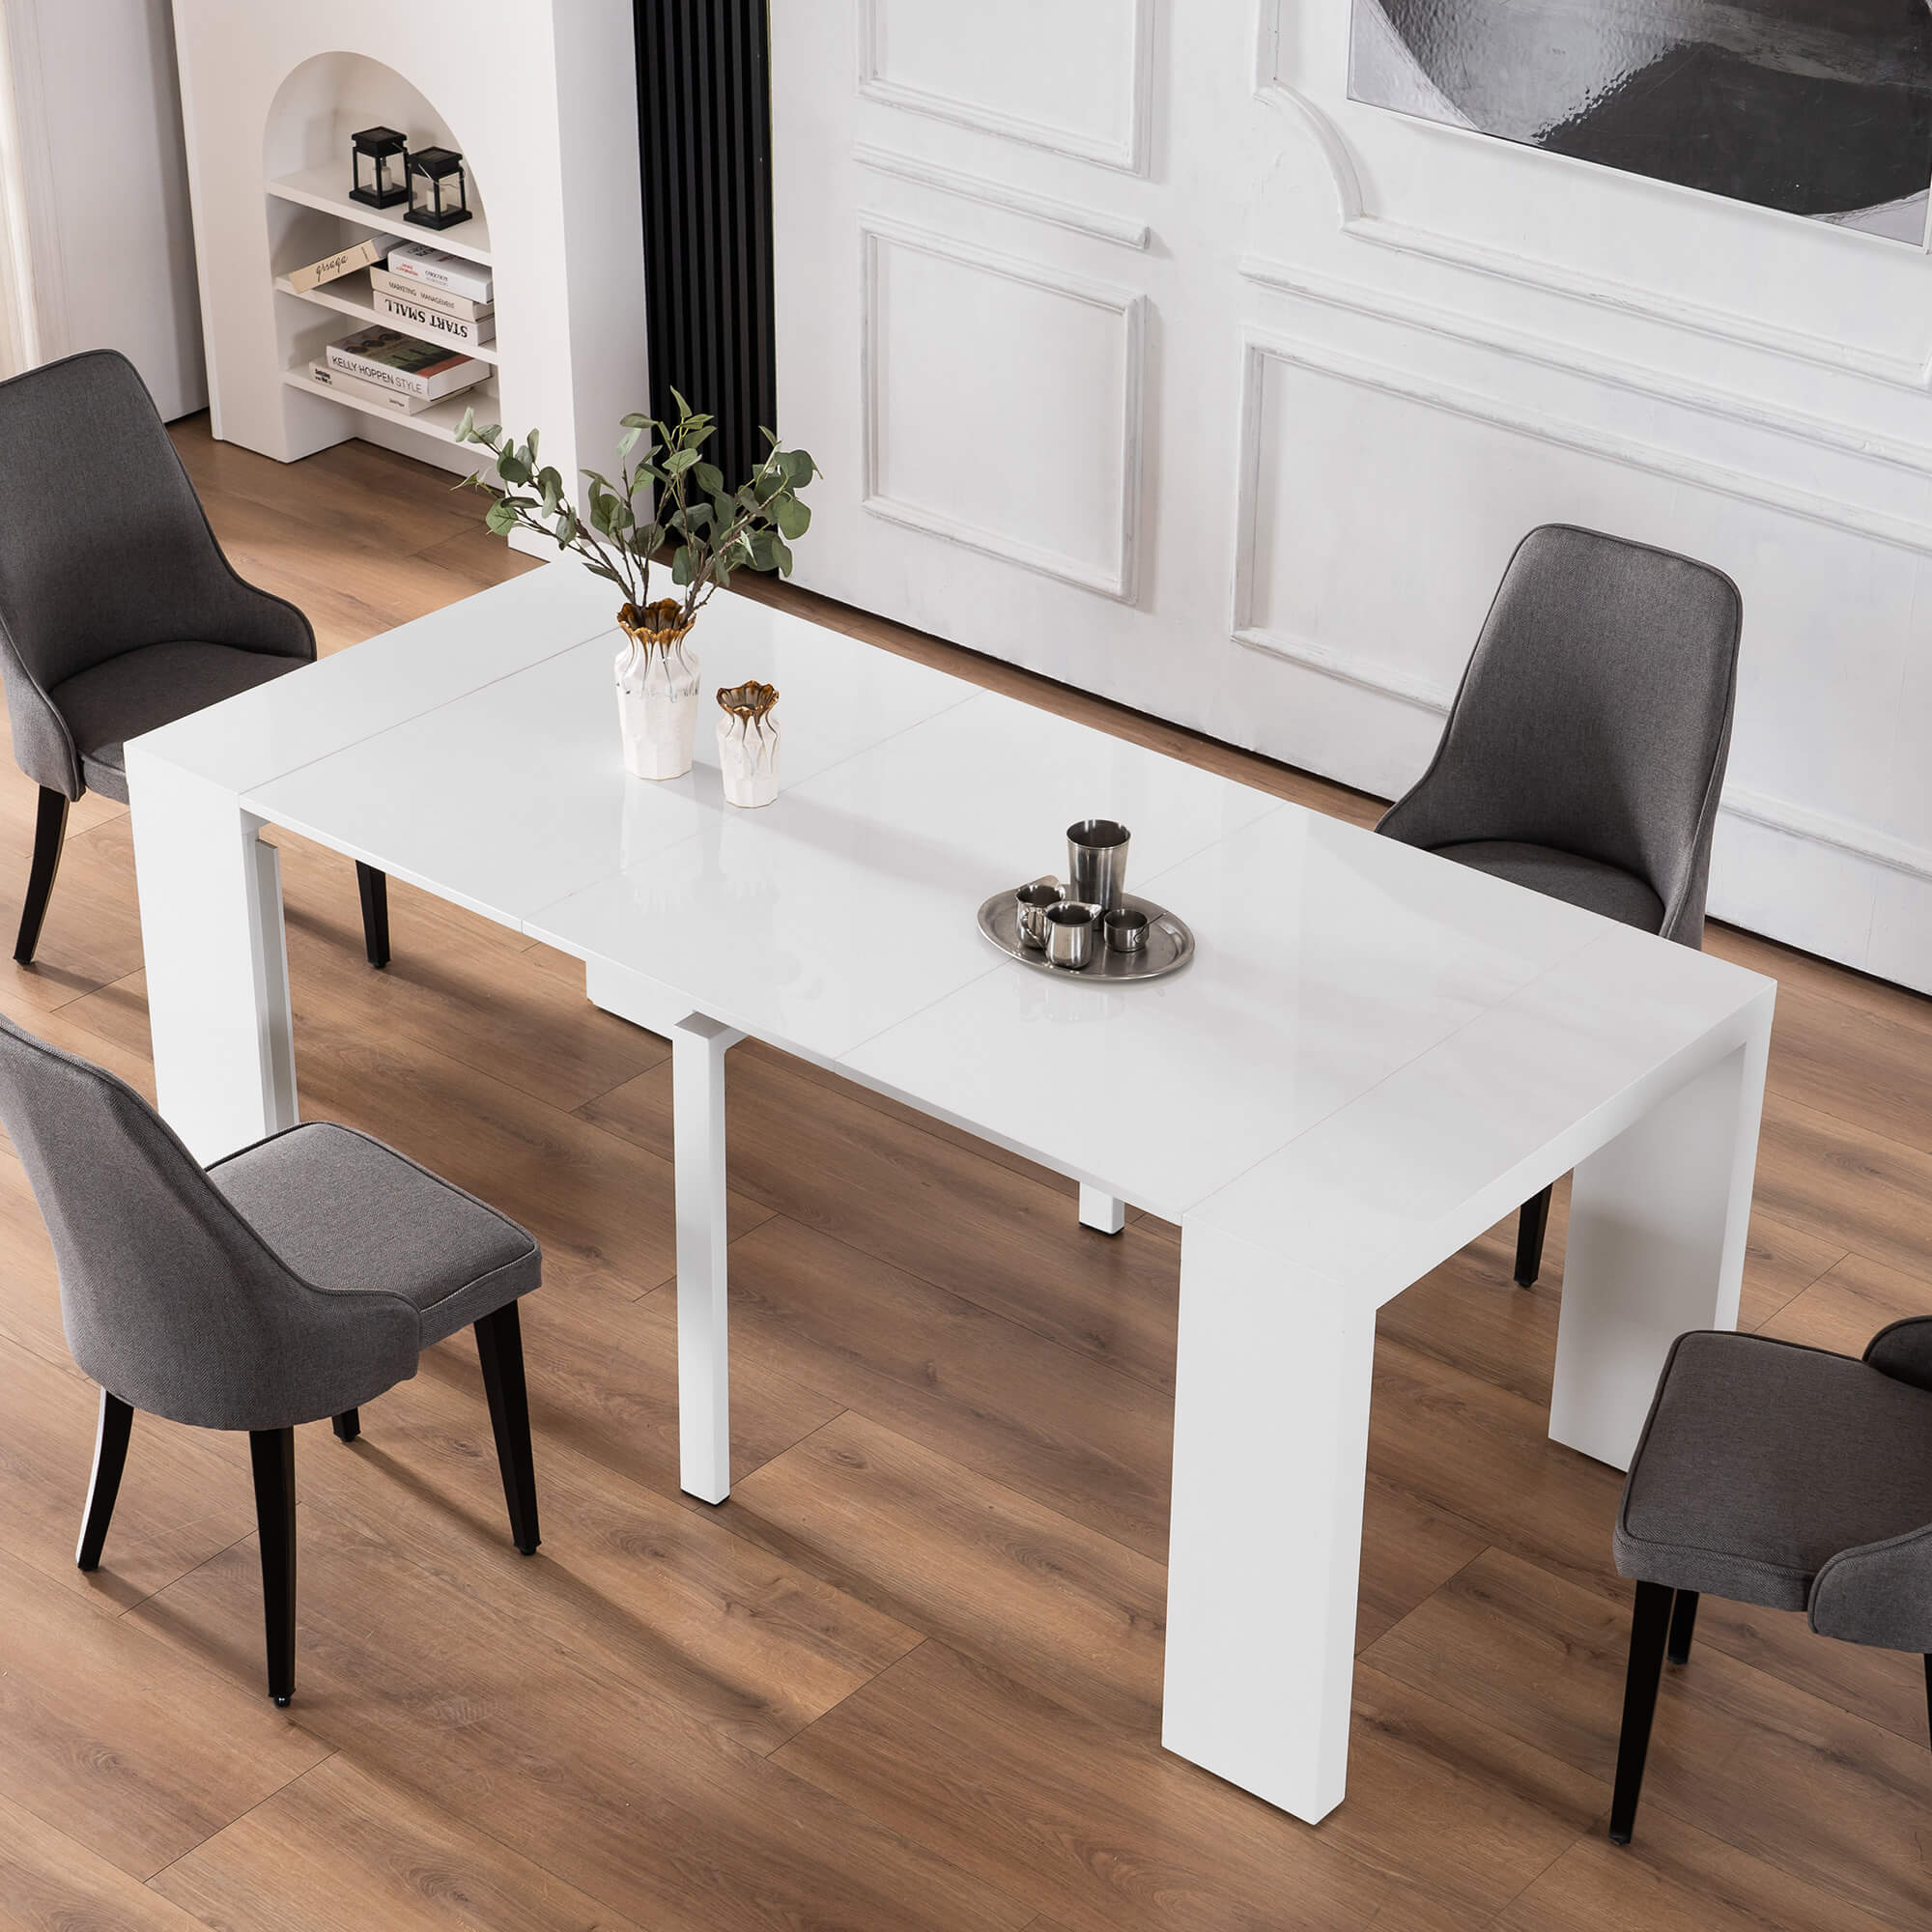 Ivinta Expandable Dining Table with Leaf, Rectangular White Wood Dining Table